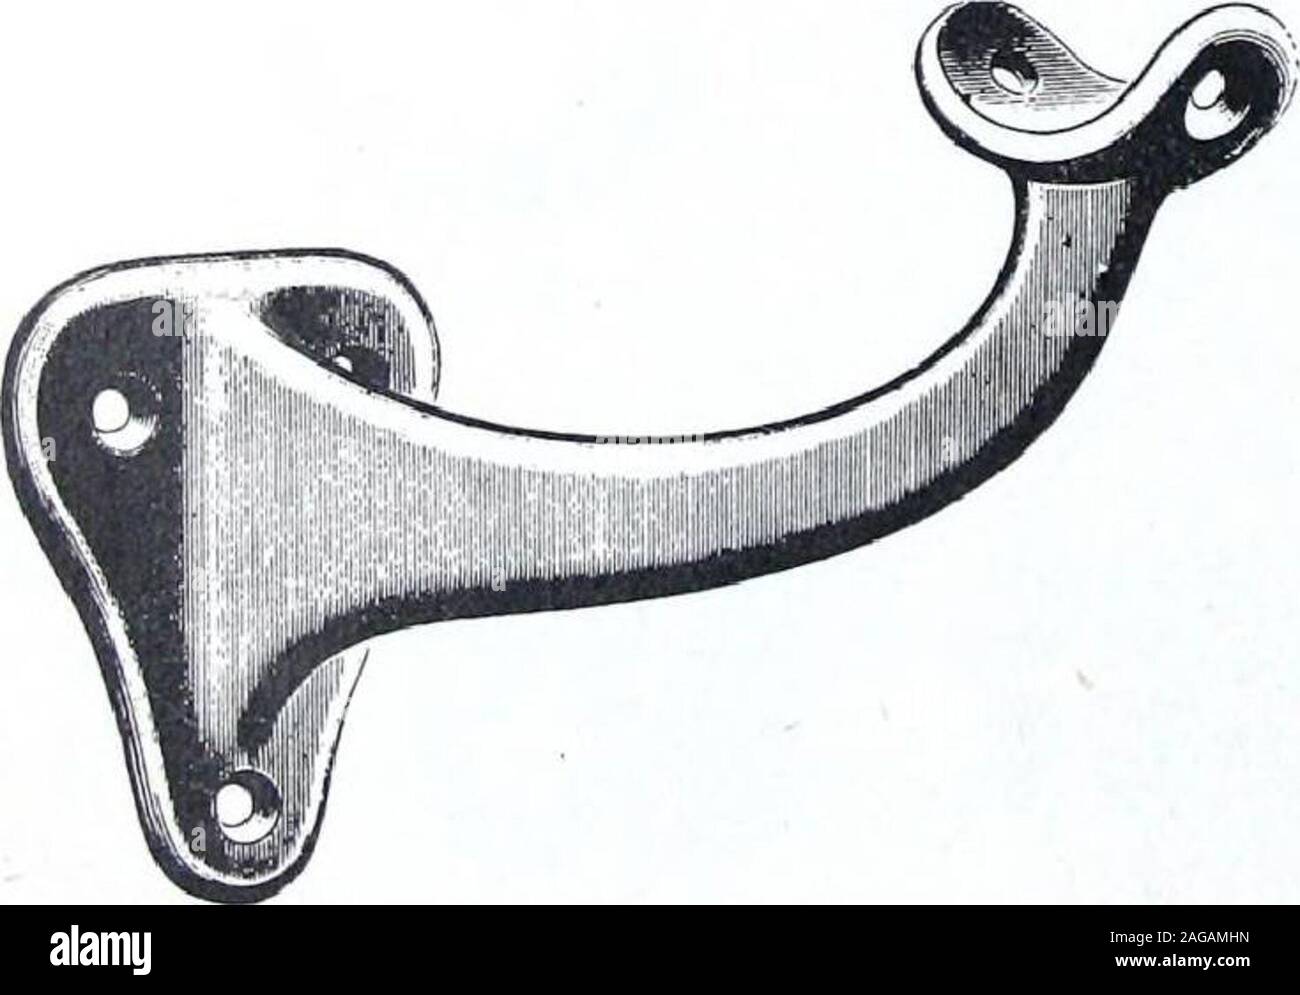 . Illustrated Catalogue of Locks and Builders Hardware. 4 in. Round Bar ?-cr; No. 358No. 558-No. 658- WARDROBE HOOKS Cast Iron, Water Tumbled, Japanned Finish.Cast Iron, Water Tumbled, Amber Bronze FinishCast Iron, Water Tumbled, Plated Finishes. Packed One Dozen in a box. HAT PINS No. 357—Cast Iron, Water Tumbled, Japanned Finish.No. 557—Cast Iron, Water Tumbled, Amber Bronze Finish.No. 657—Cast Iron, Water Tumbled, Plated Finishes. Packed One Dozen in a box.. POLE BRACKETS For IK in. Round Bar. Projection from underside of base to centre of bar, 4&gt;^ in. No. 3557—Cast Iron, Water Tumbled, Stock Photo